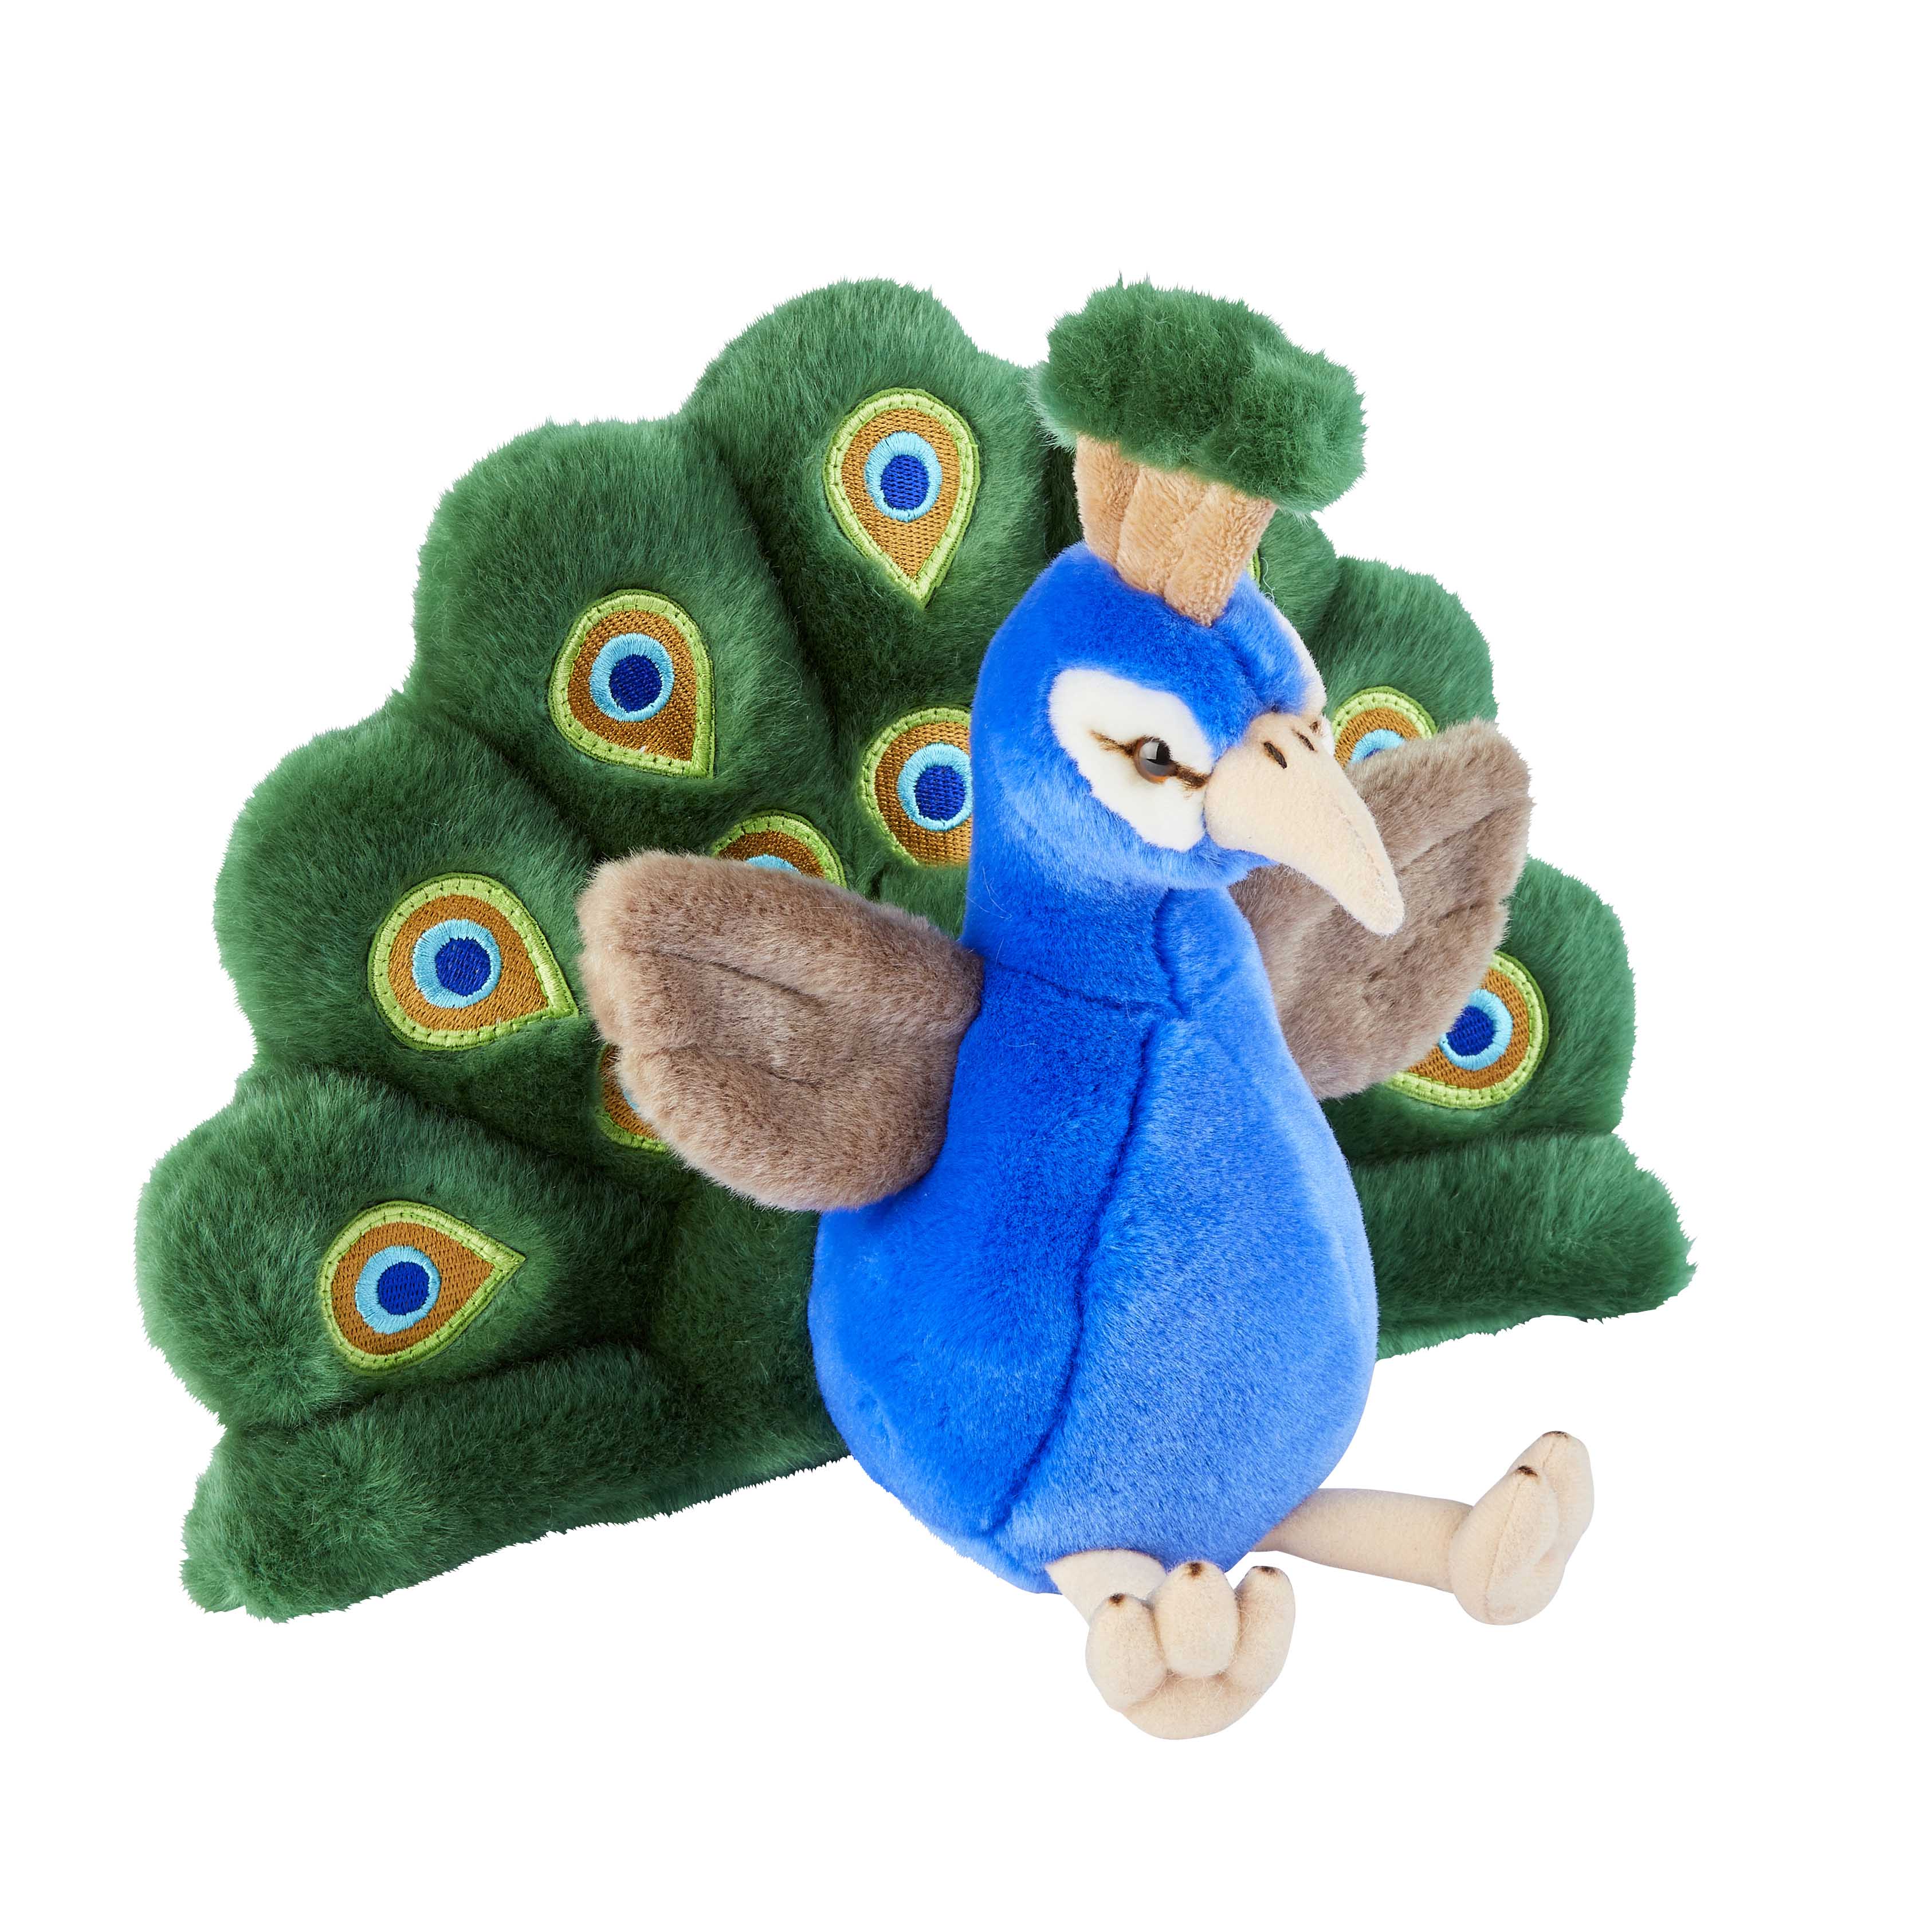 Bespoke Suppliers of Toy Peacock for Parks